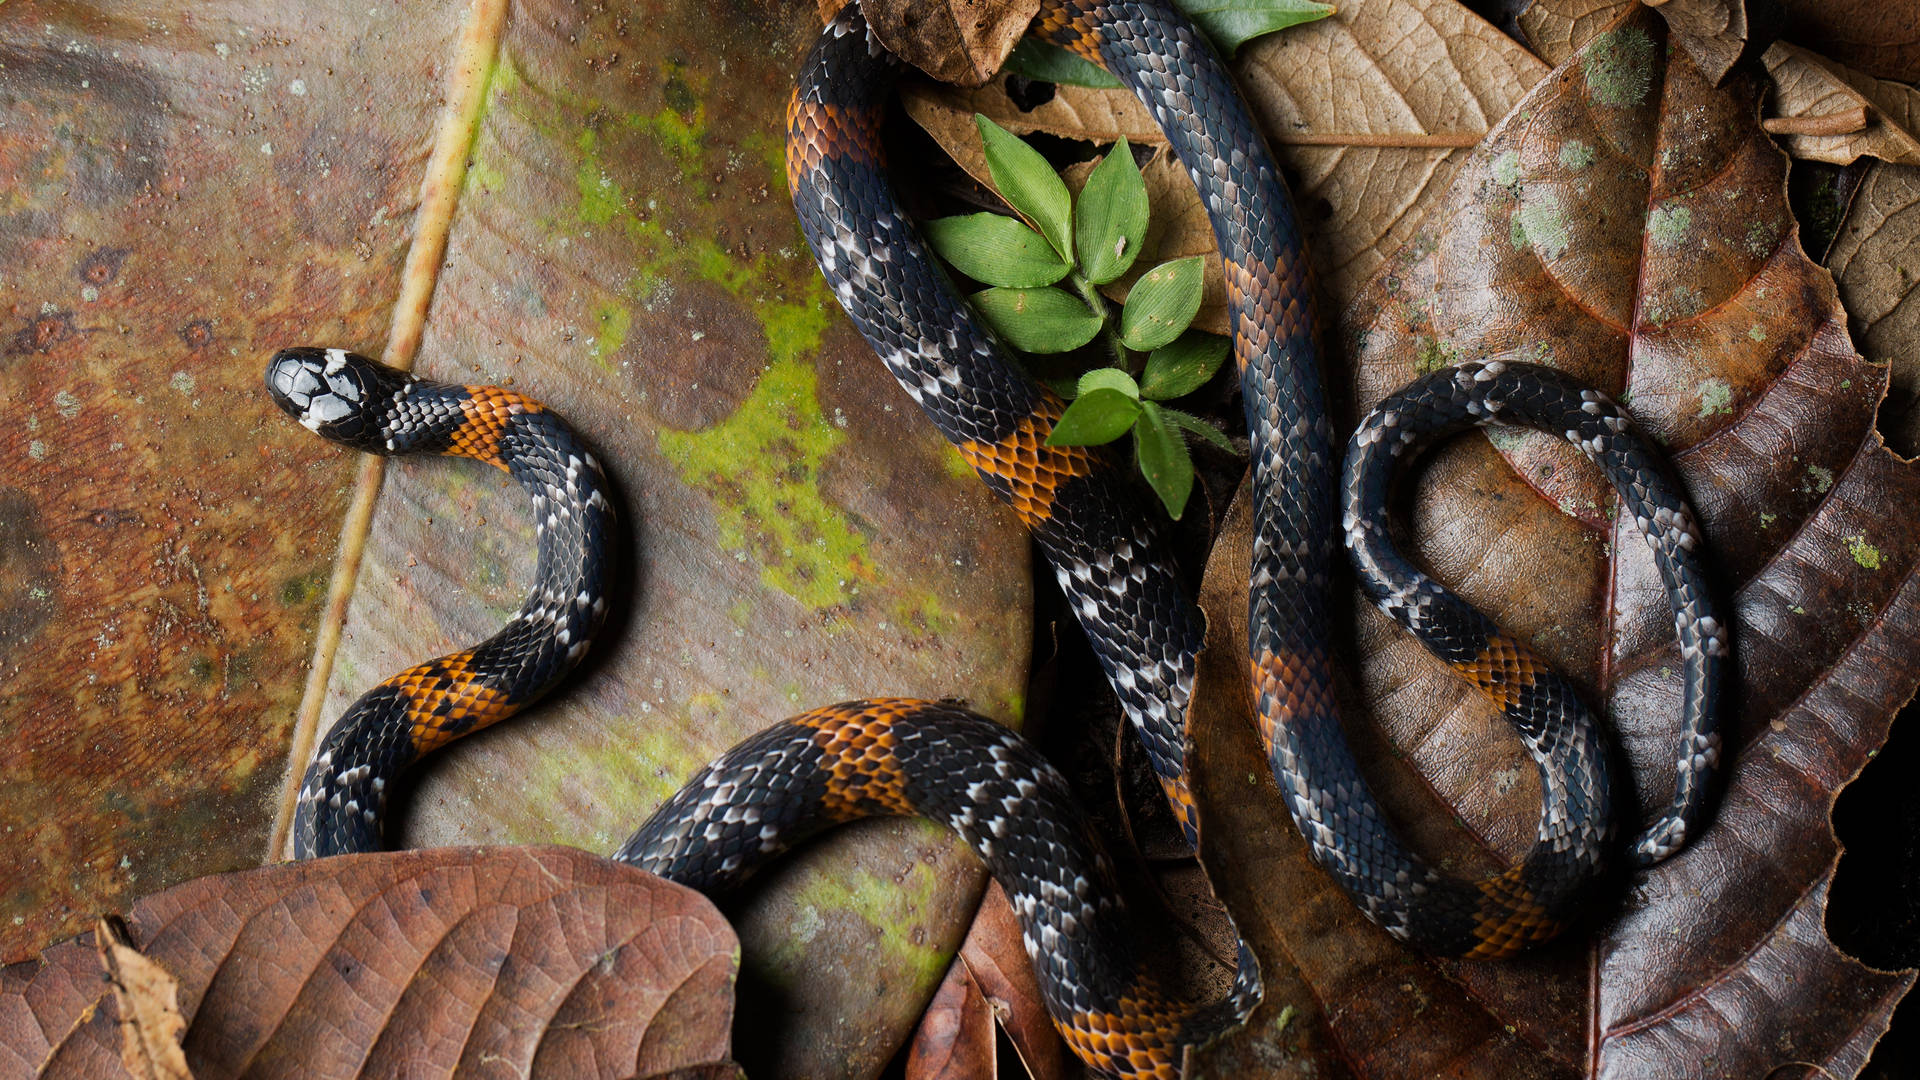 Vibrant Philippine False Coral Snake Resting on Dried Leaves Wallpaper